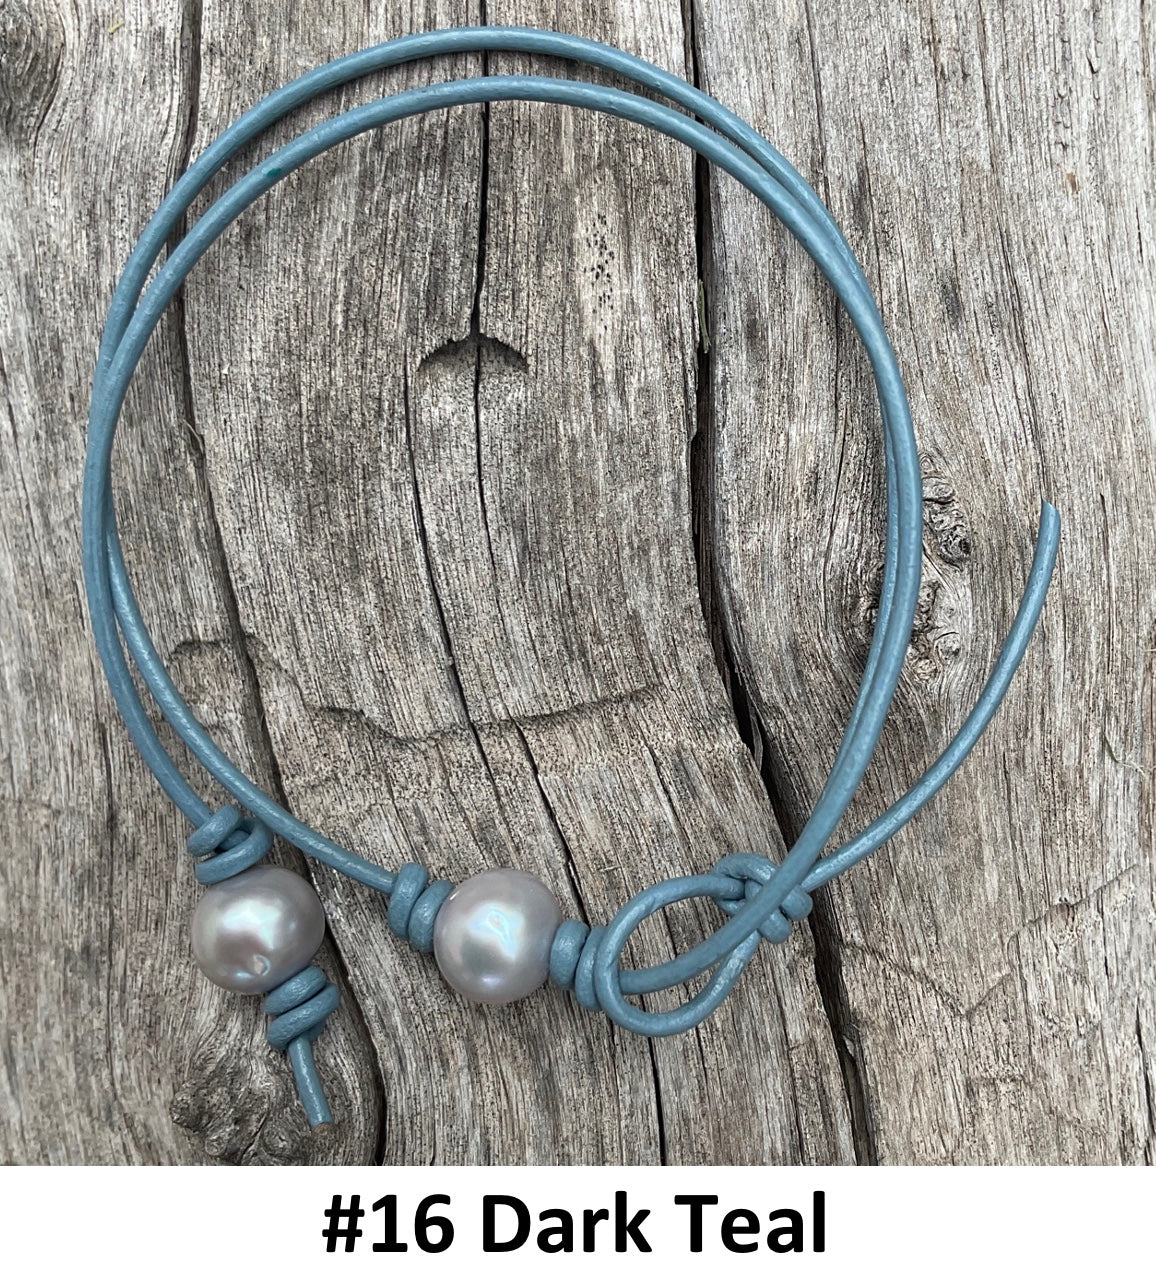 Single Gray Pearl Necklace, #16 Dark Teal Leather Cord